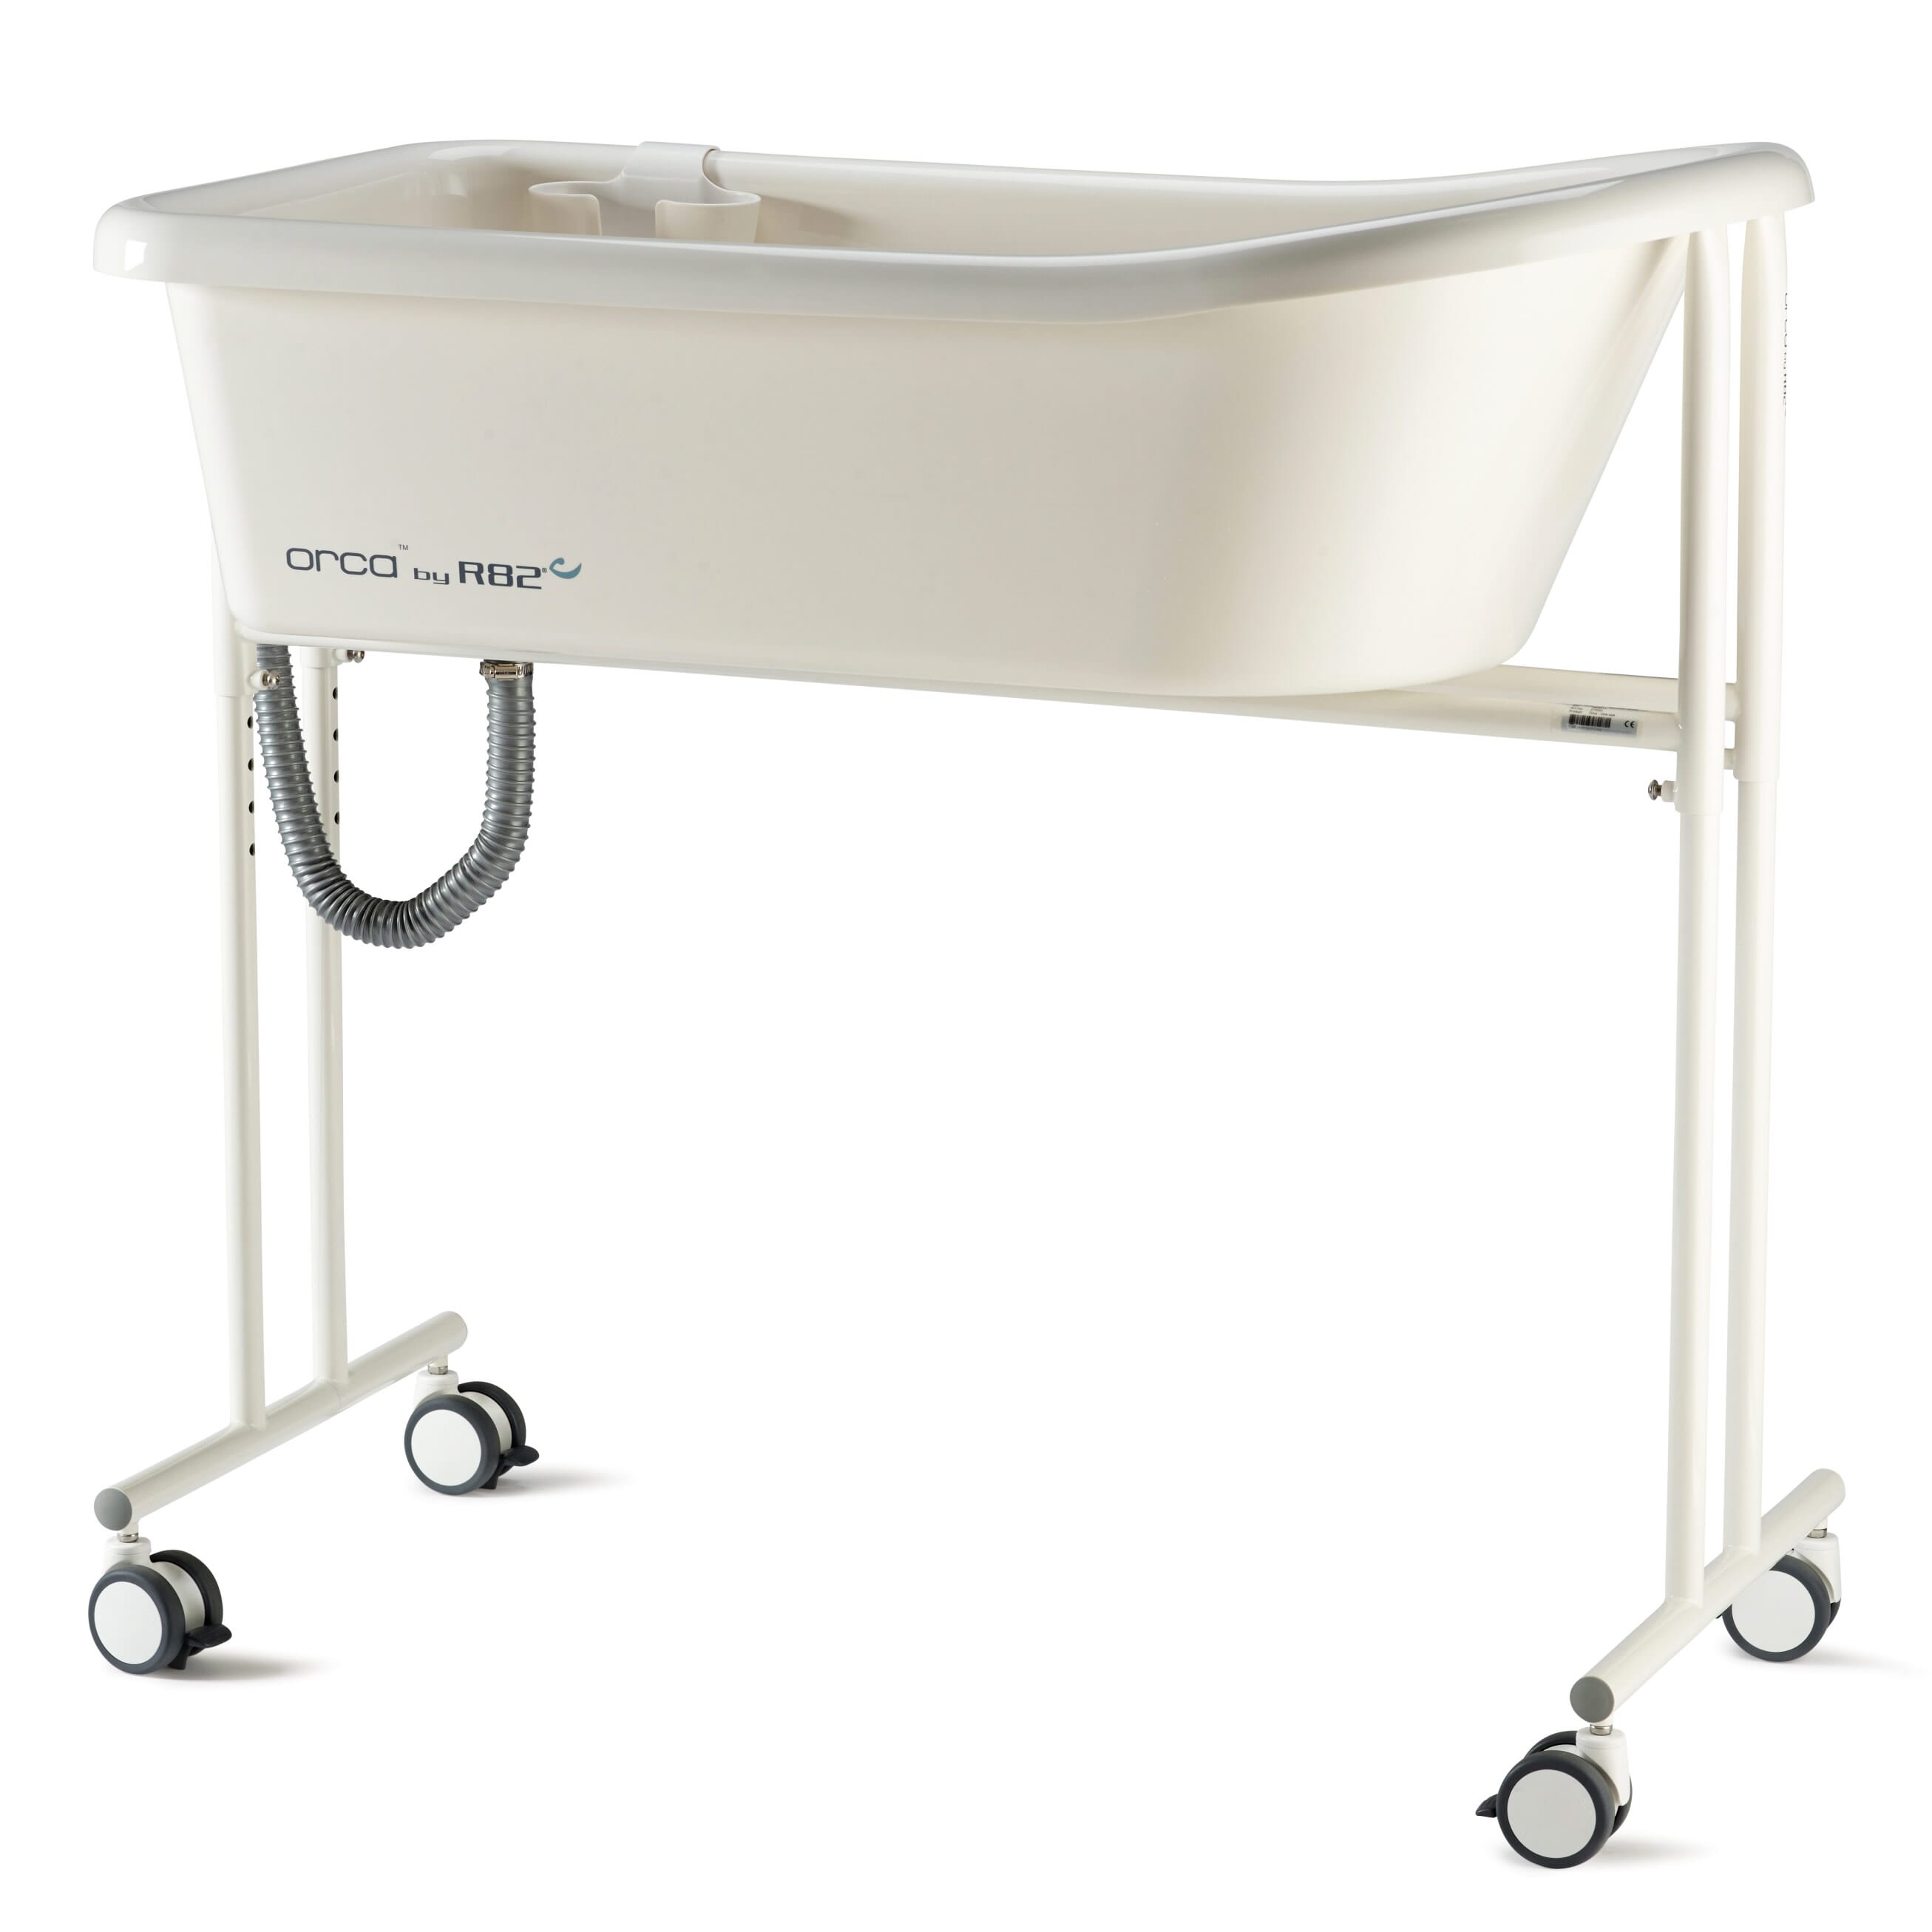 View Orca Bath Tub with Stand information